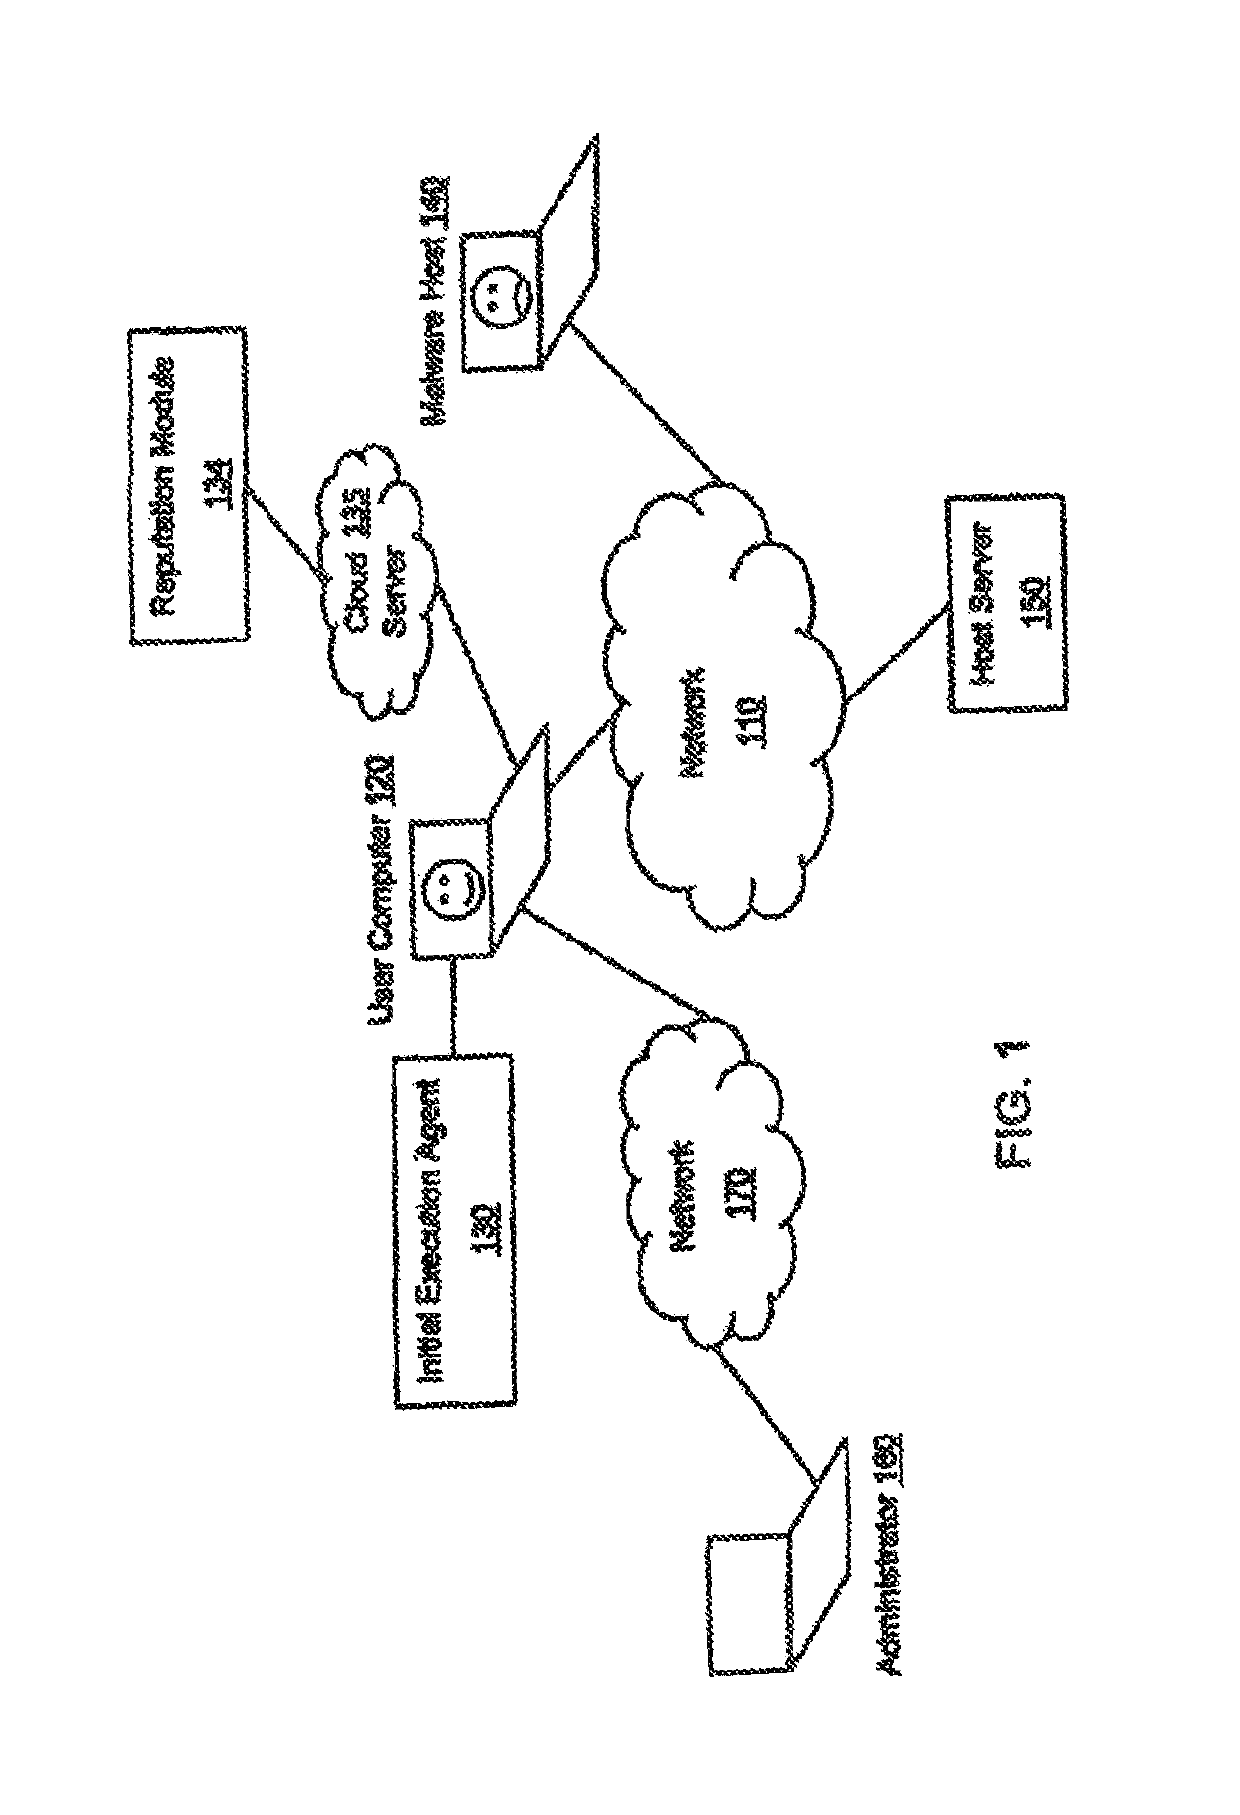 Method and system for modeling all operations and executions of an attack and malicious process entry